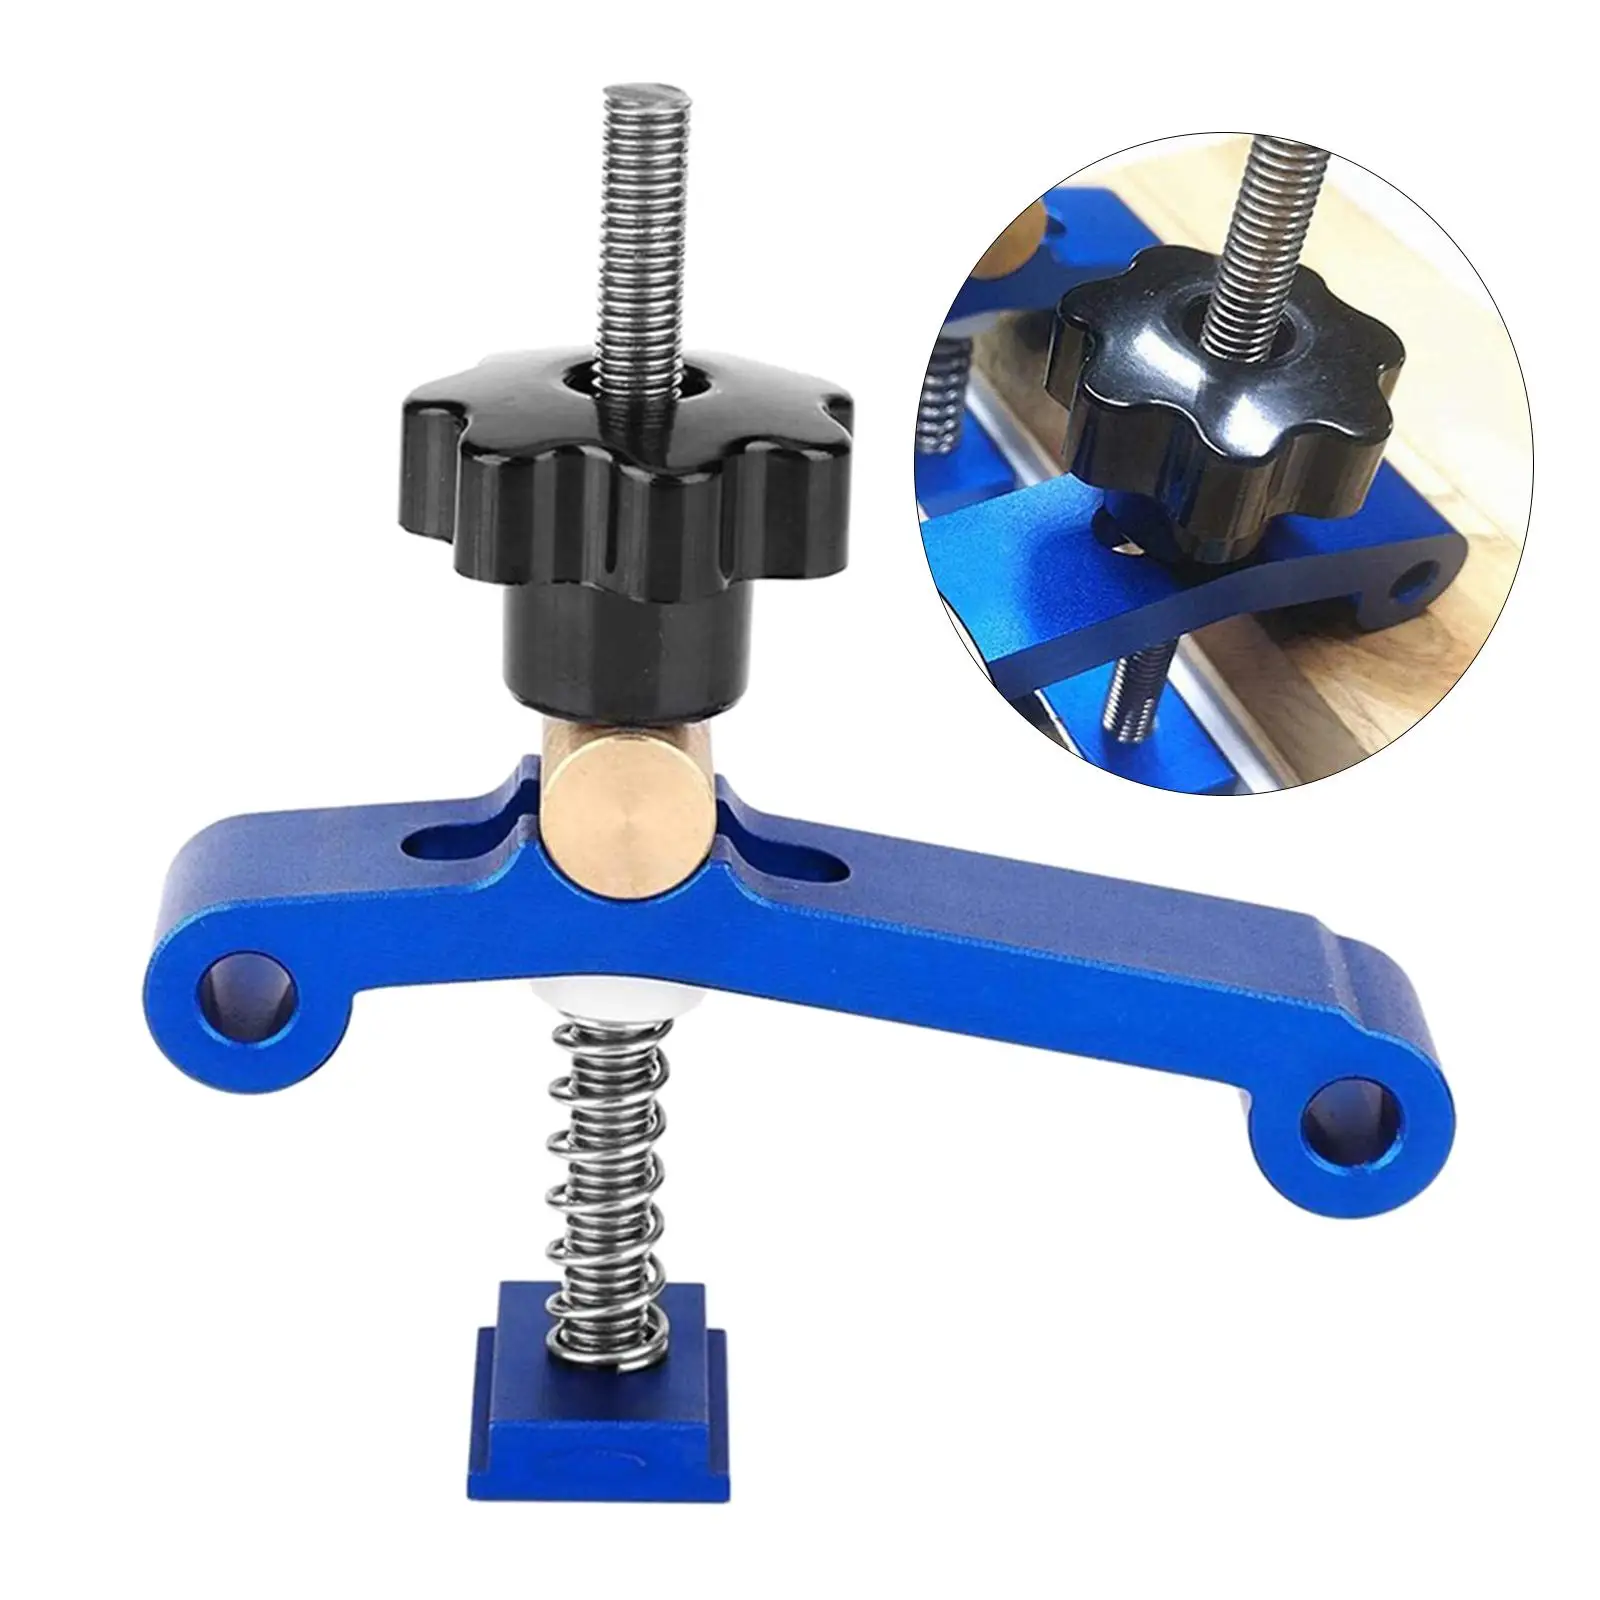  Clamp Metal Quick Acting Set Useful for  Woodworking Tool Metalworking Supplies